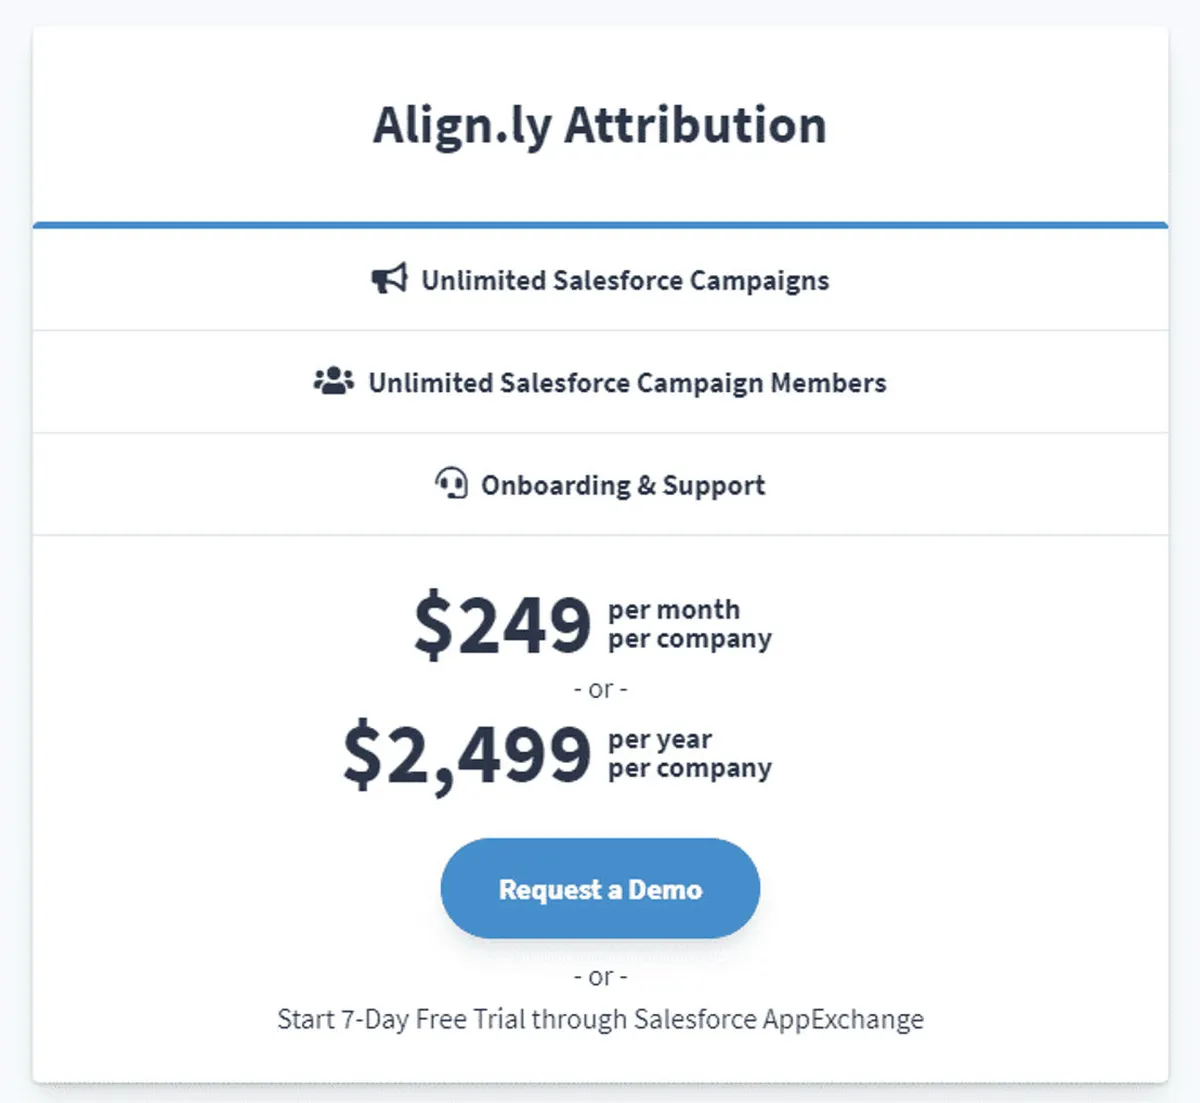 Align.ly Attribution Pricing Plan